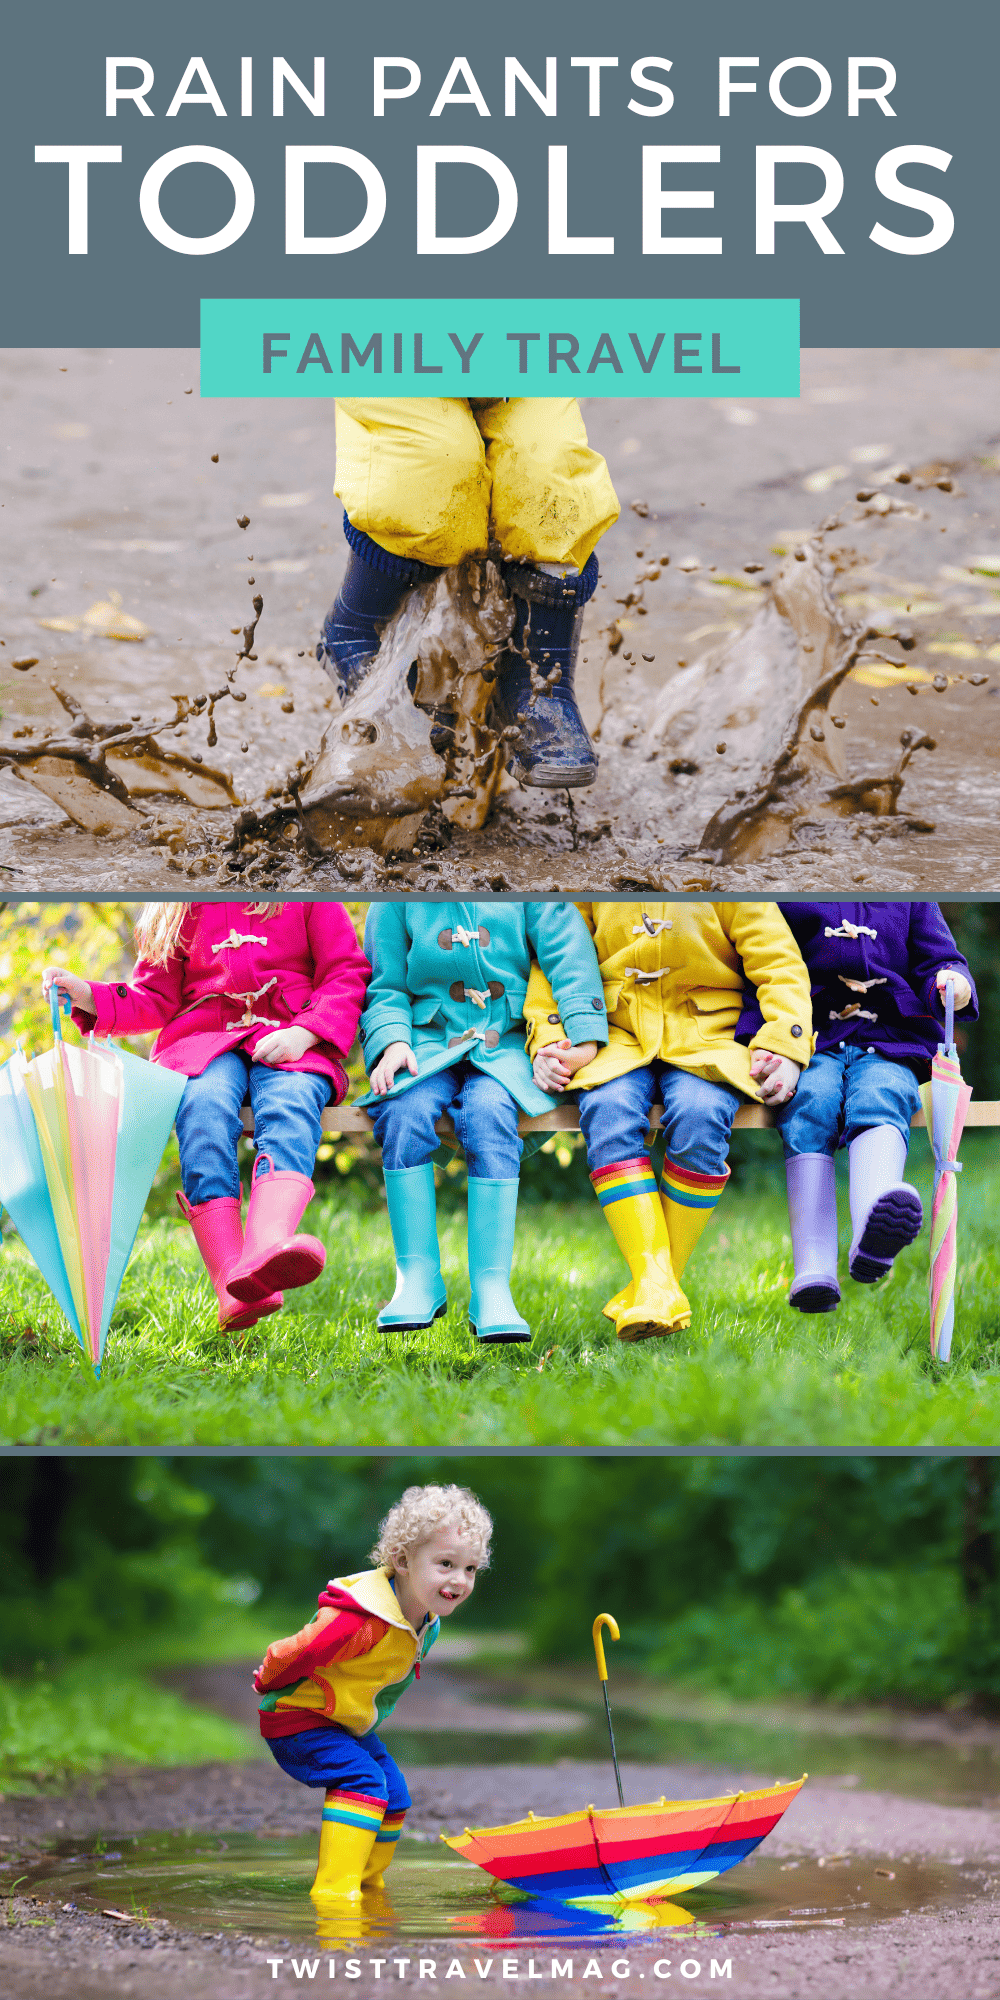 How to find the perfect toddler rain pants